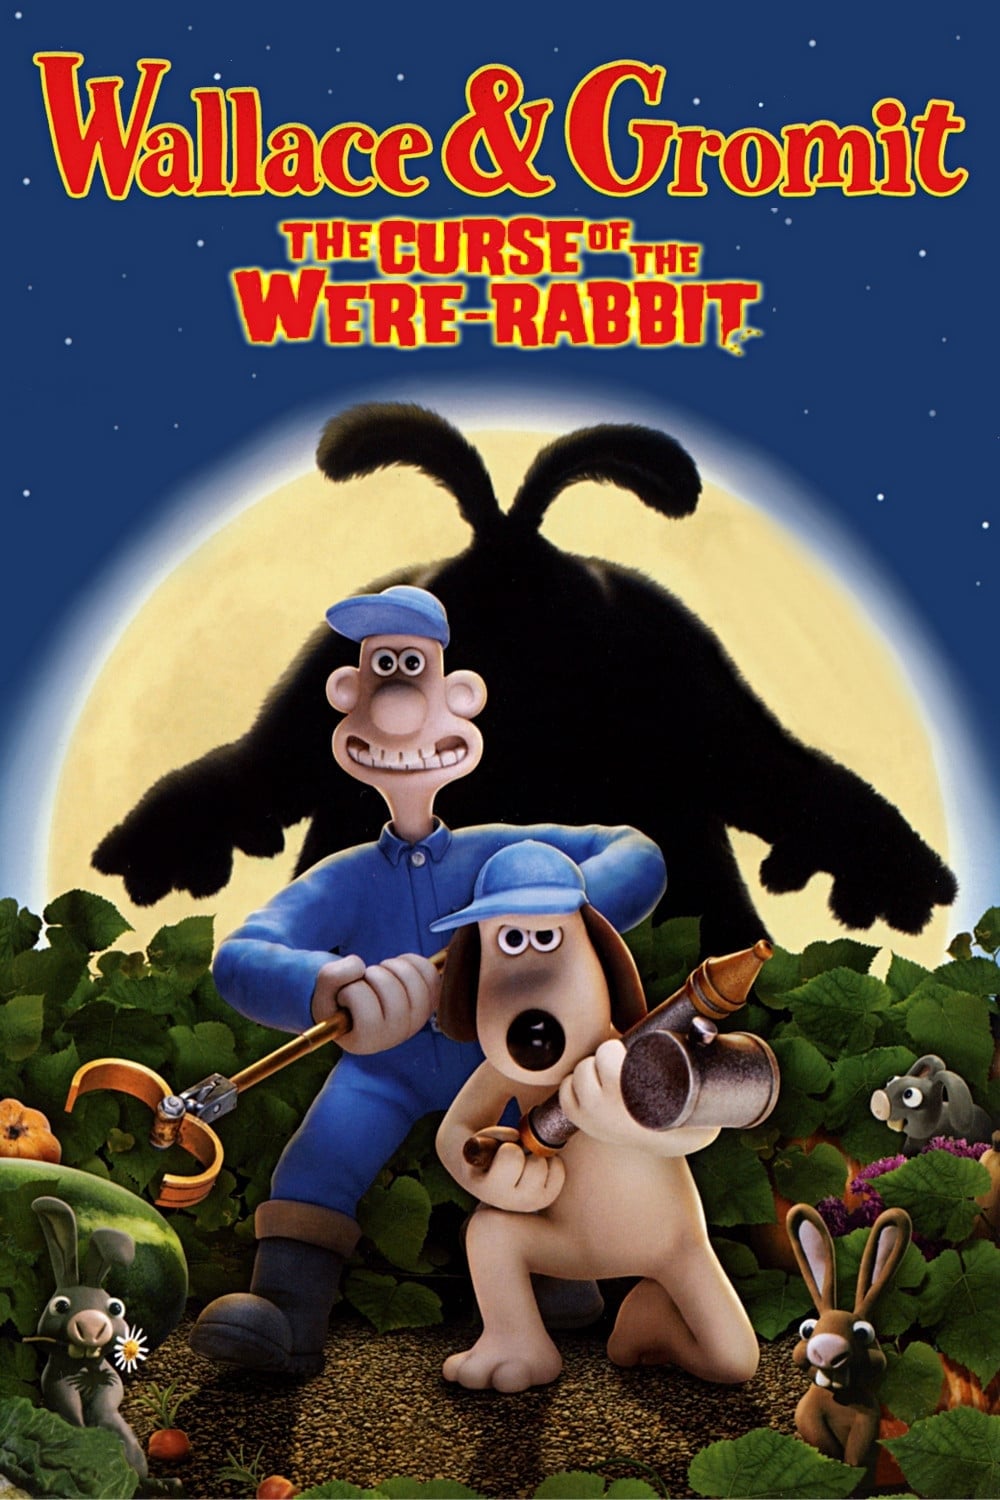 Wallace & Gromit: Lời Nguyền Của Ma Thỏ - Wallace & Gromit: The Curse of the Were-Rabbit (2005)